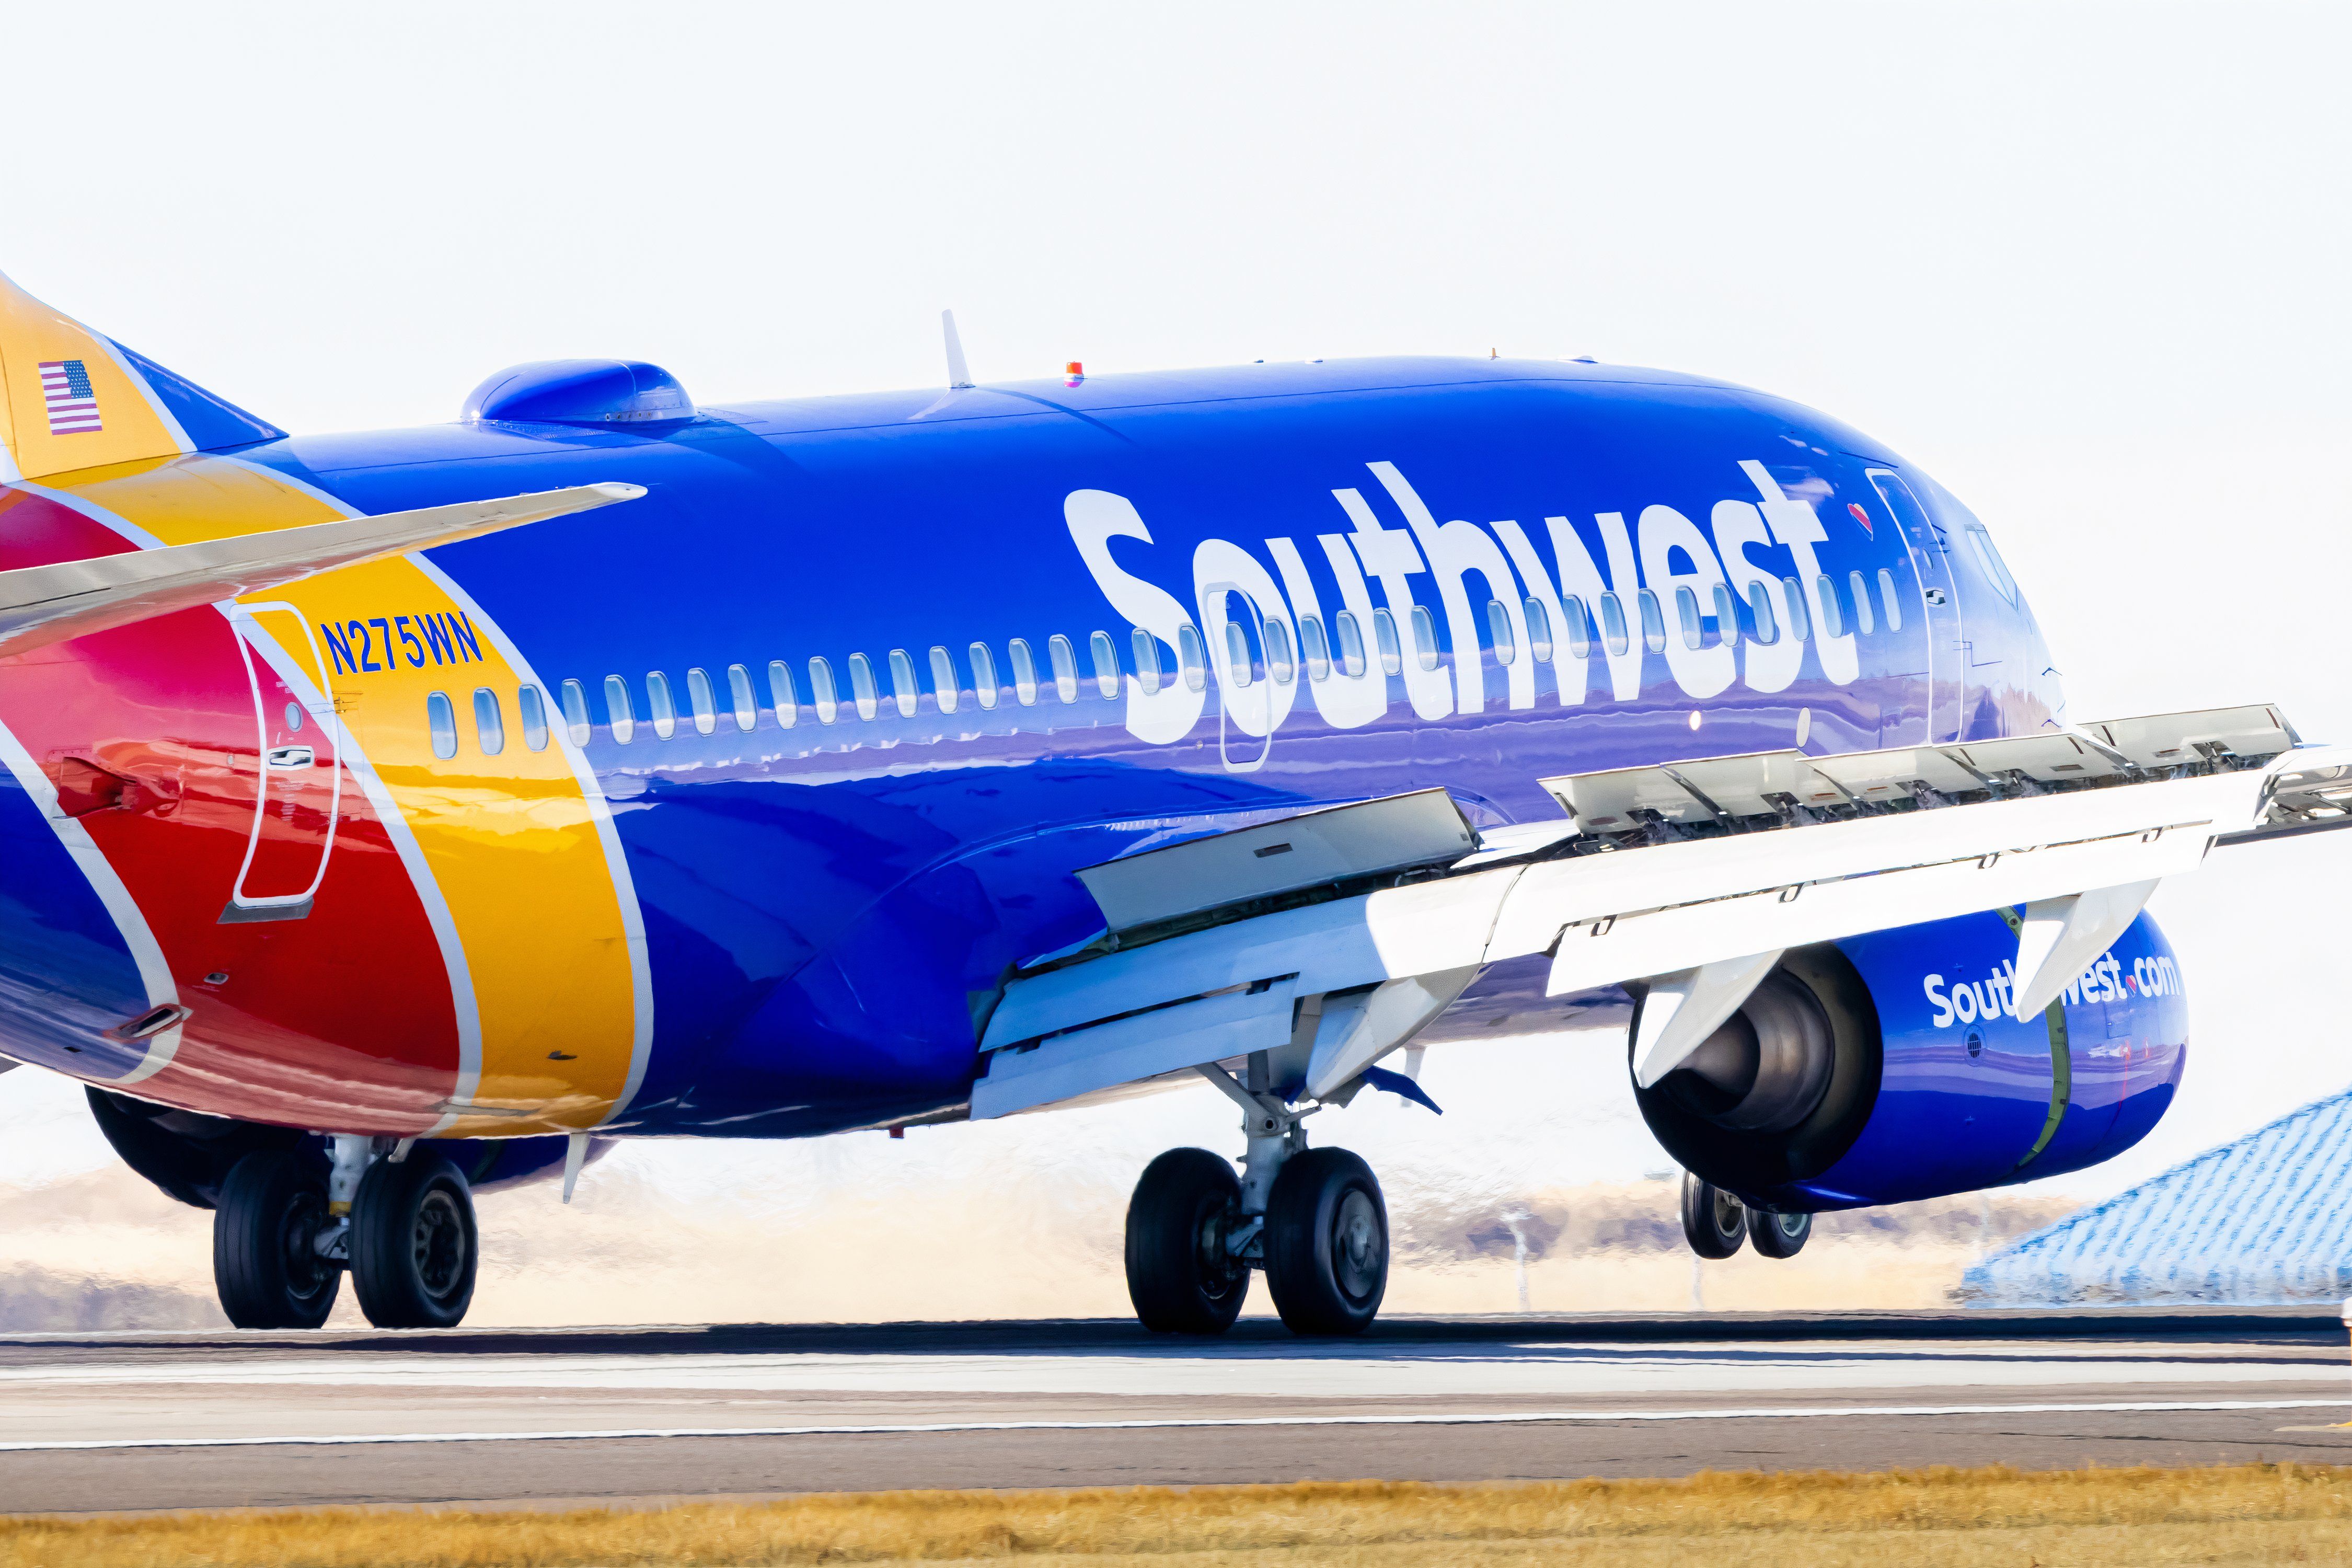 A Southwest Airlines plane takes off